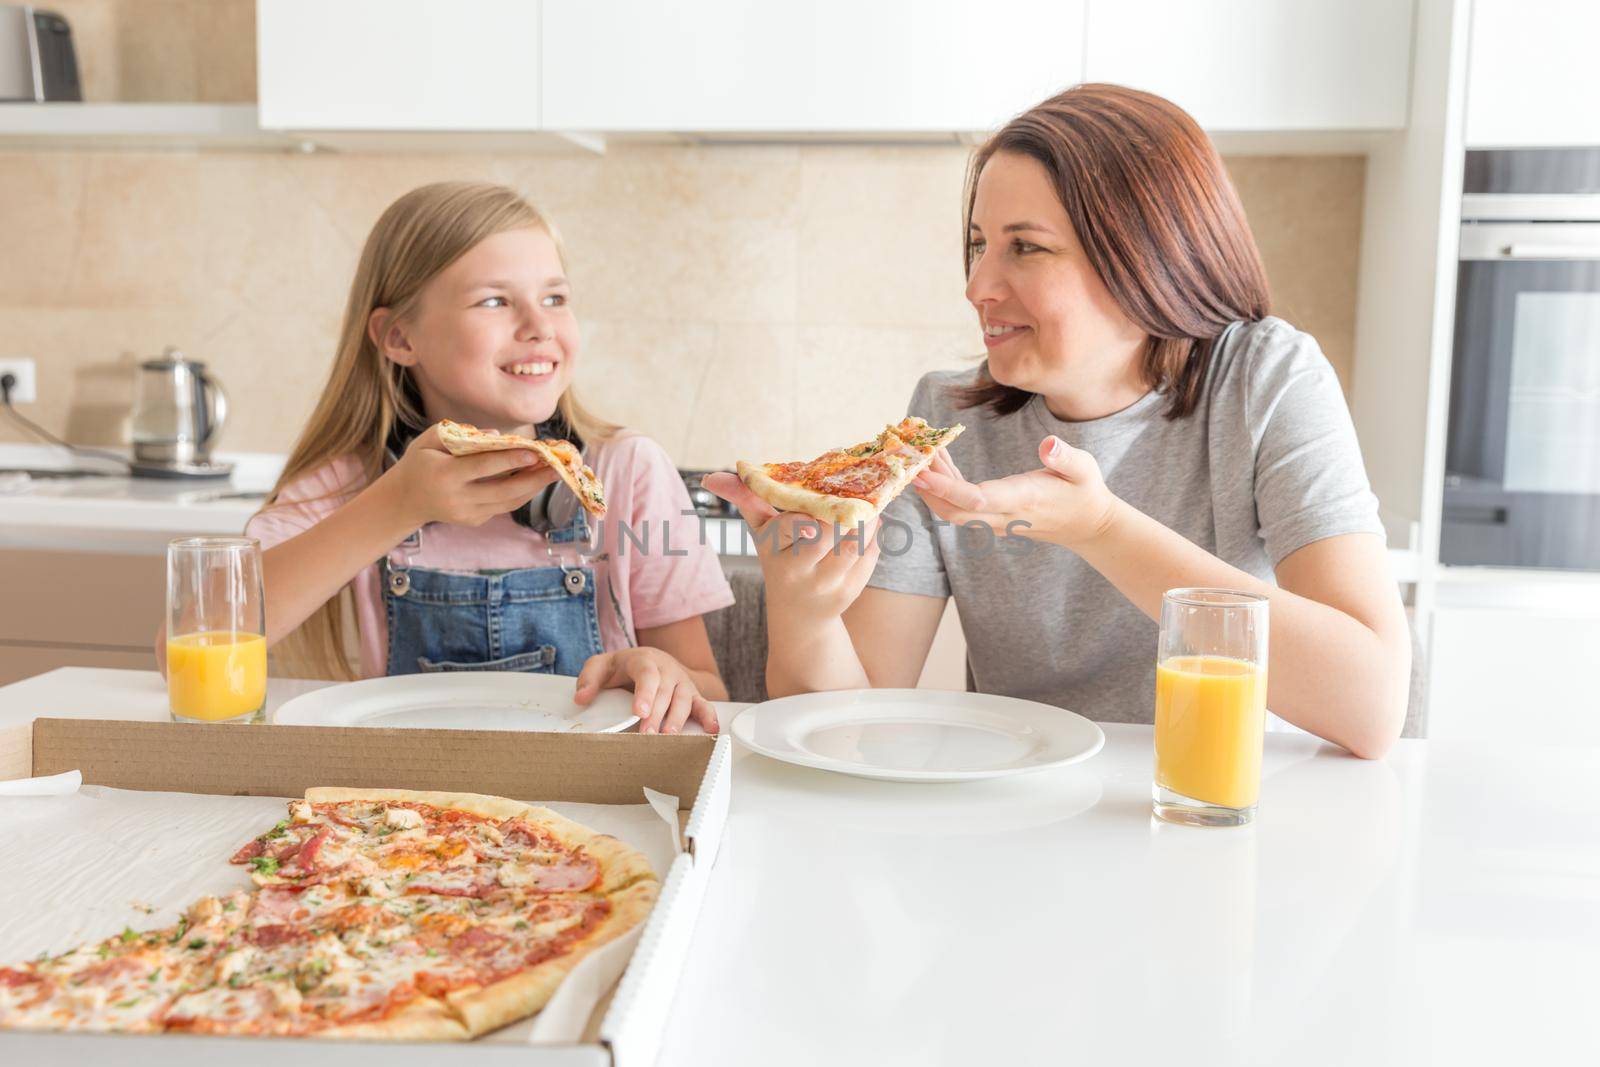 Mother and daughter sitting in the kitchen, eating pizza and having fun. Focus on daughter by Mariakray